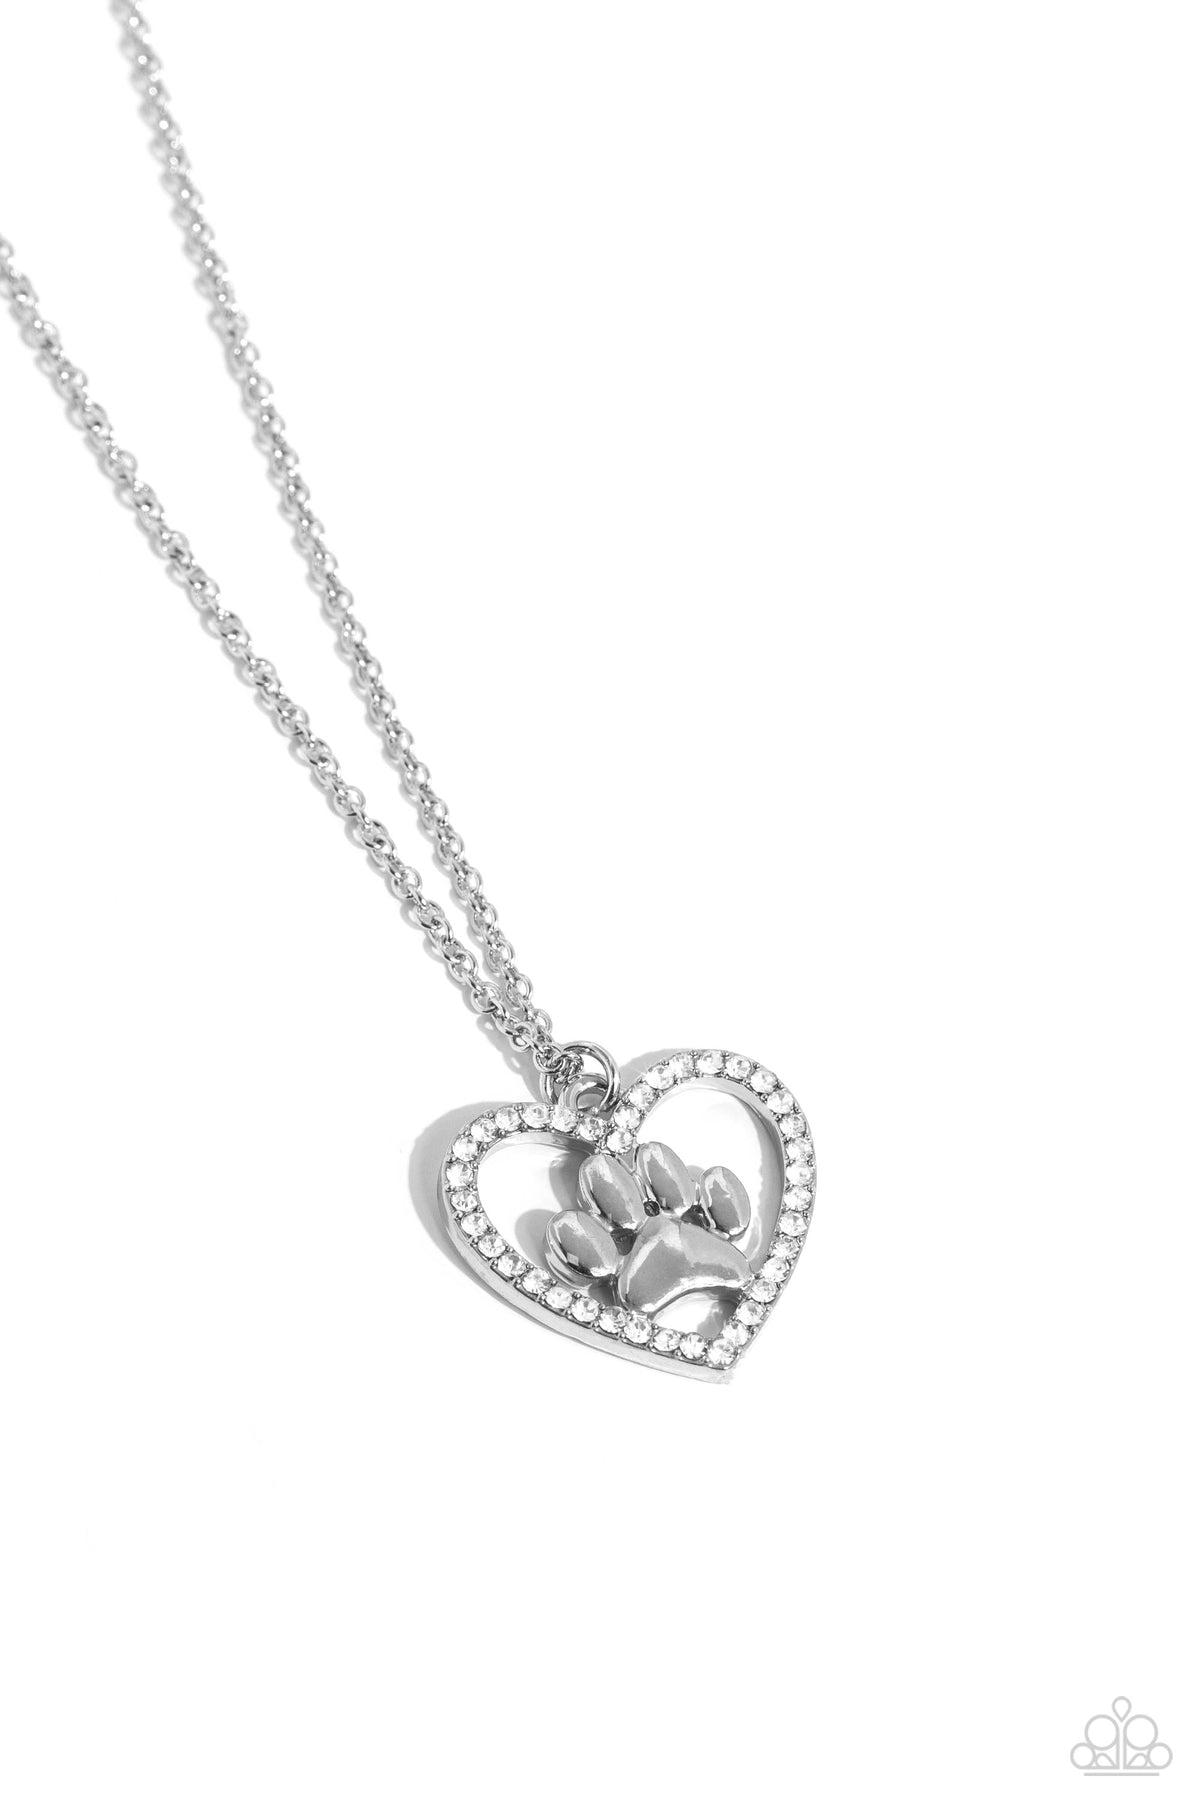 PET in Motion White Heart &amp; Paw Print Necklace - Paparazzi Accessories- lightbox - CarasShop.com - $5 Jewelry by Cara Jewels